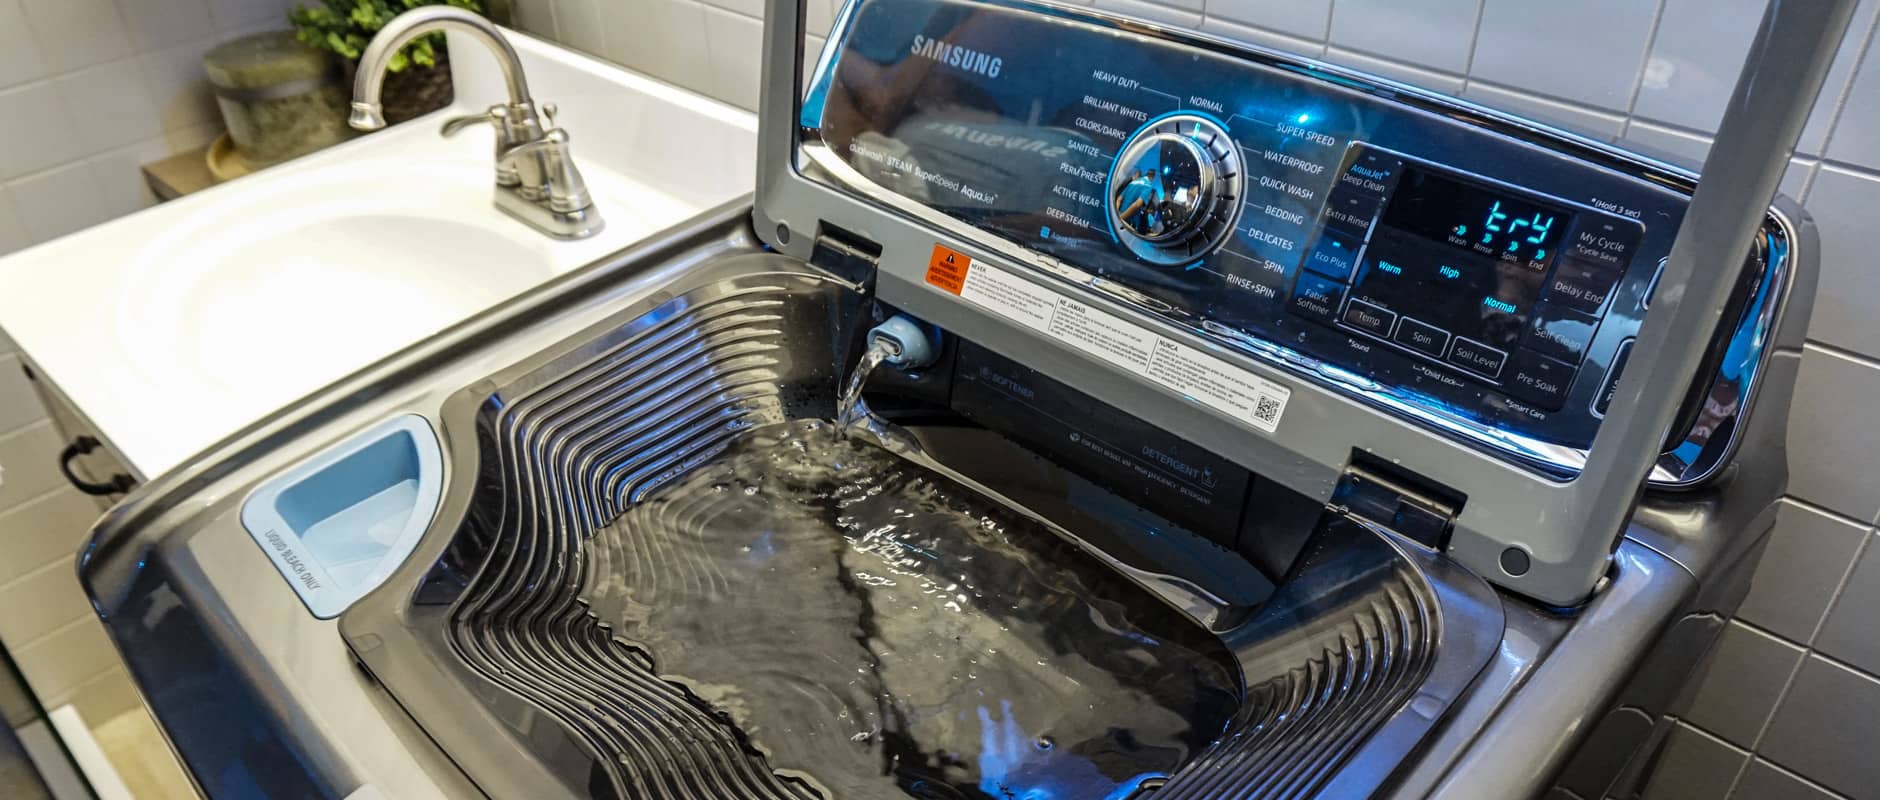 Samsung Washer Leaking Water: 5 Easy Ways To Fix It Now